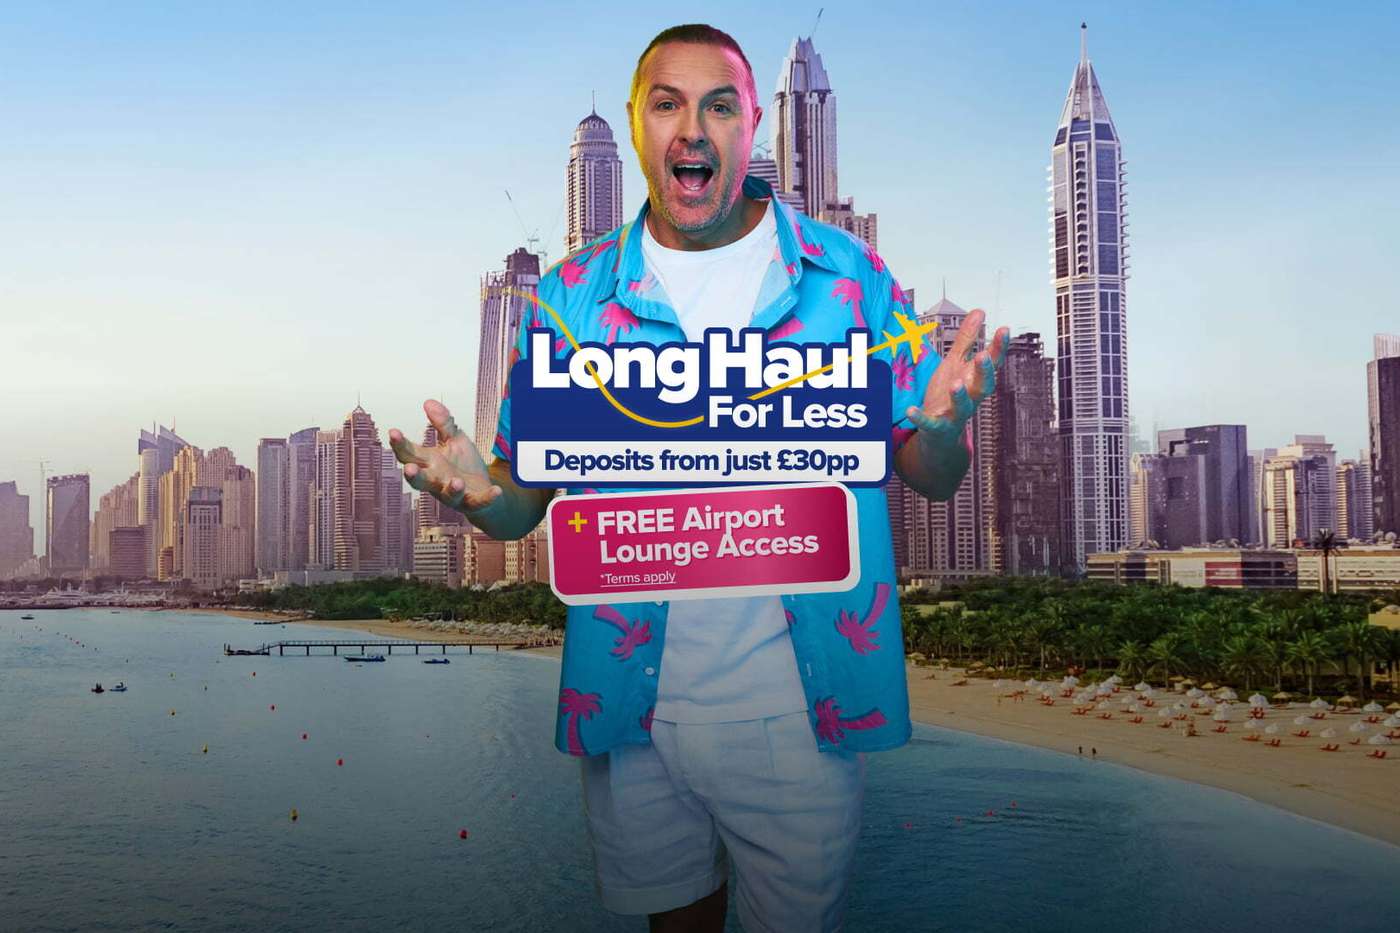 Bag FREE Airport Lounge Access on selected Long-Haul Holidays with On the Beach.